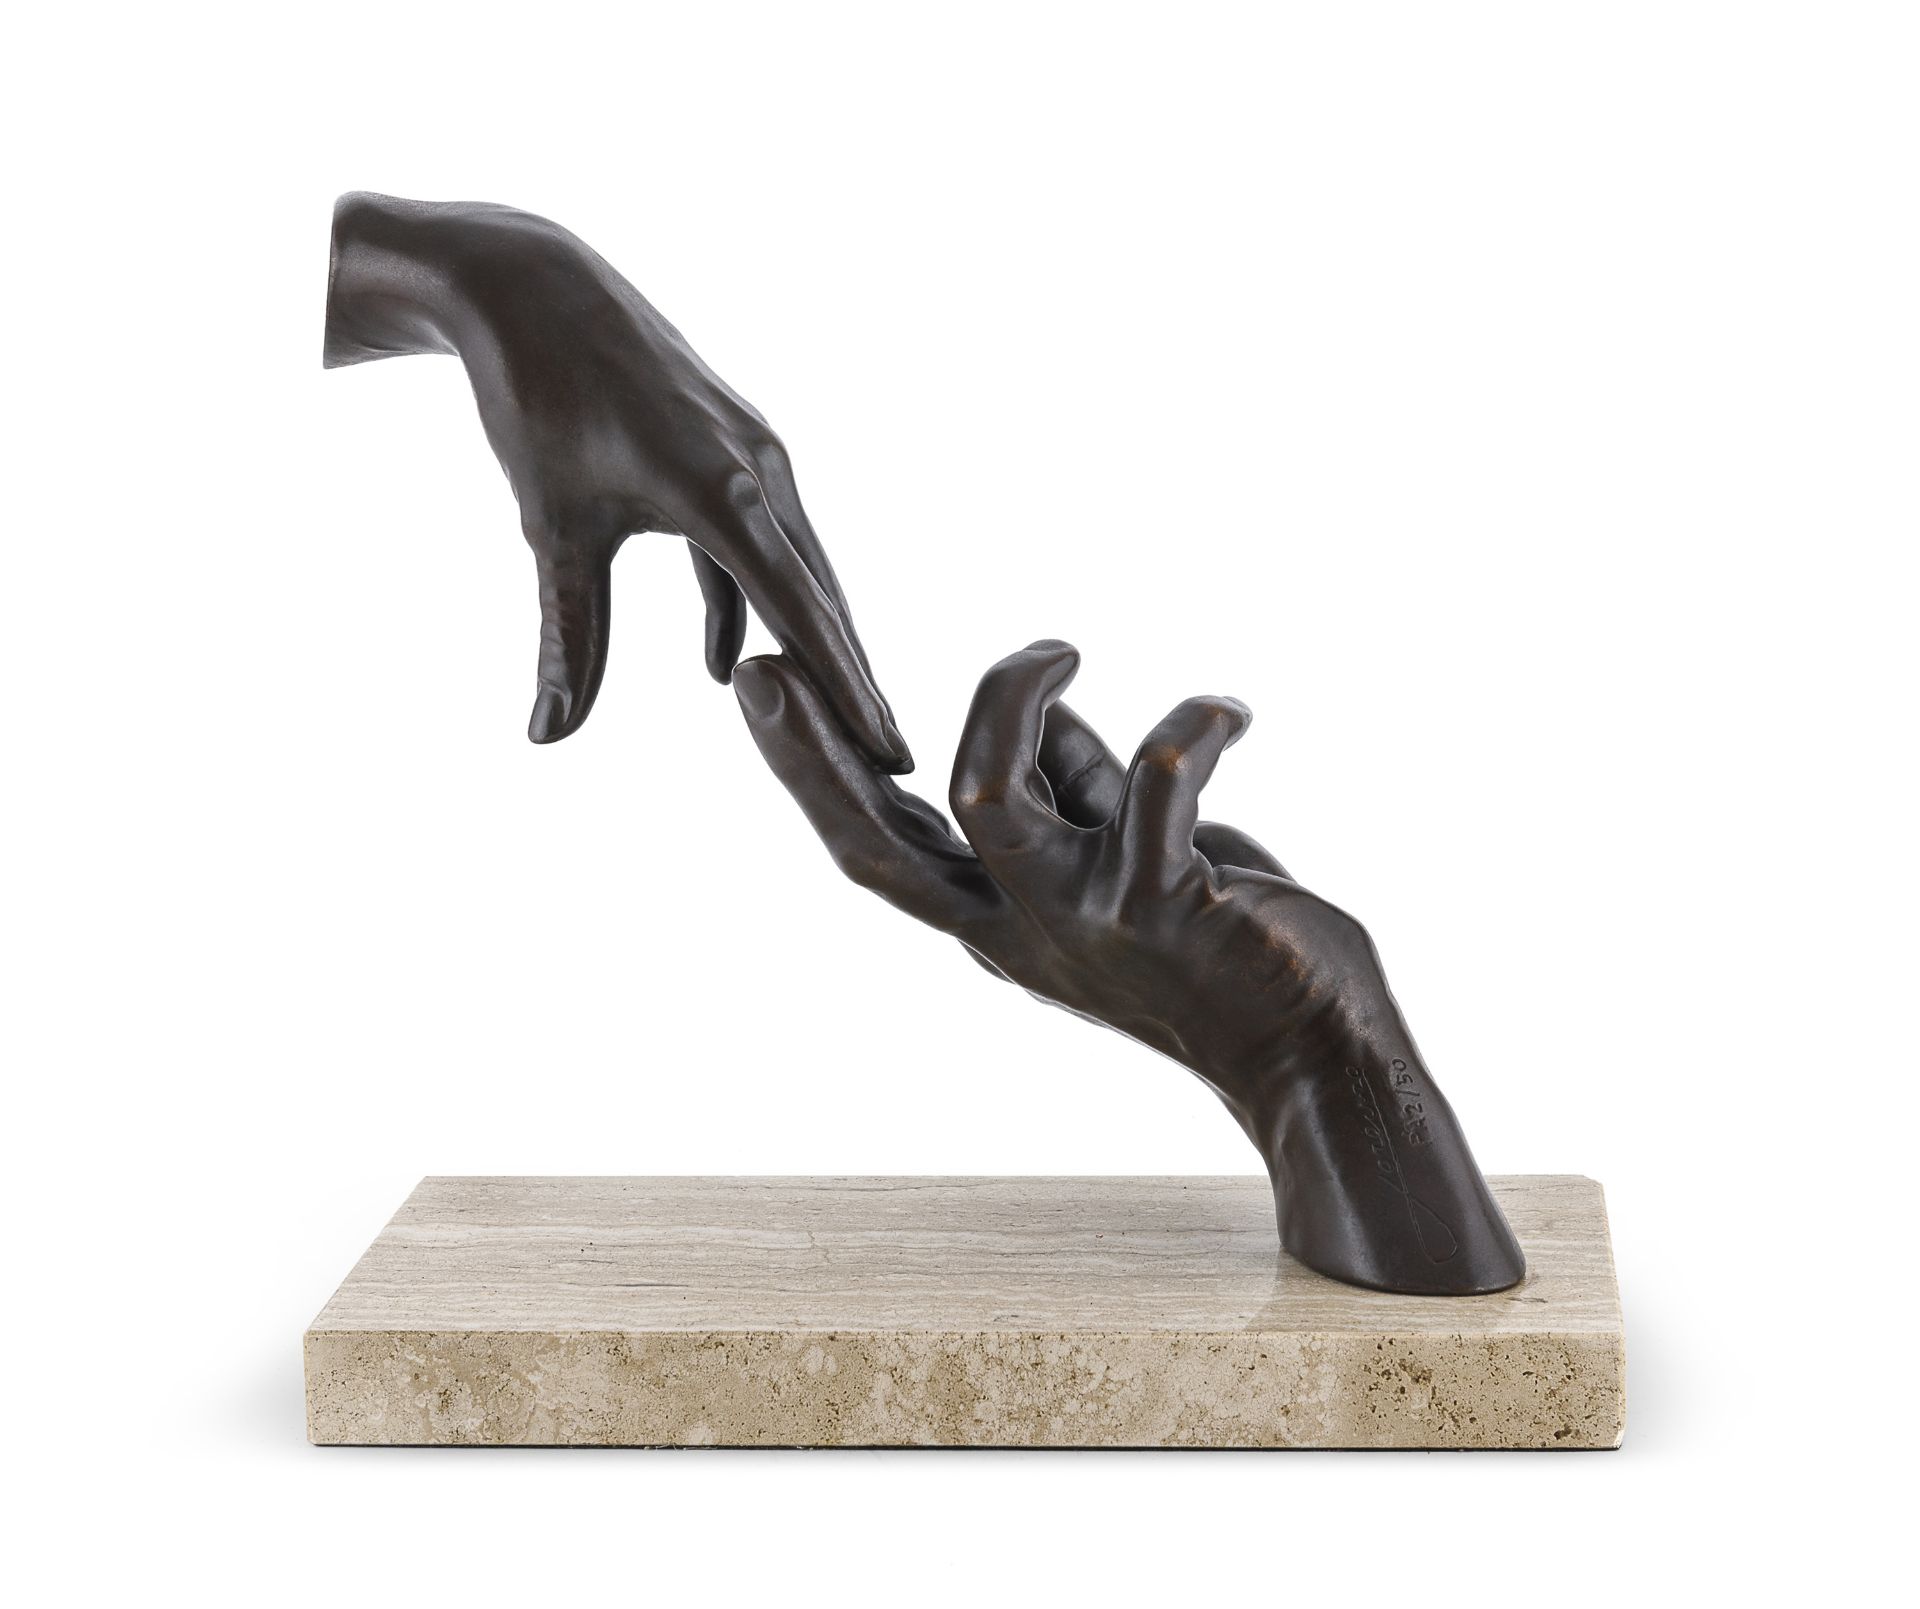 BRONZE-PLATED RESIN SCULPTURE 'FIRST LOVE' BY LORENZO QUINN 2001 - Image 2 of 3